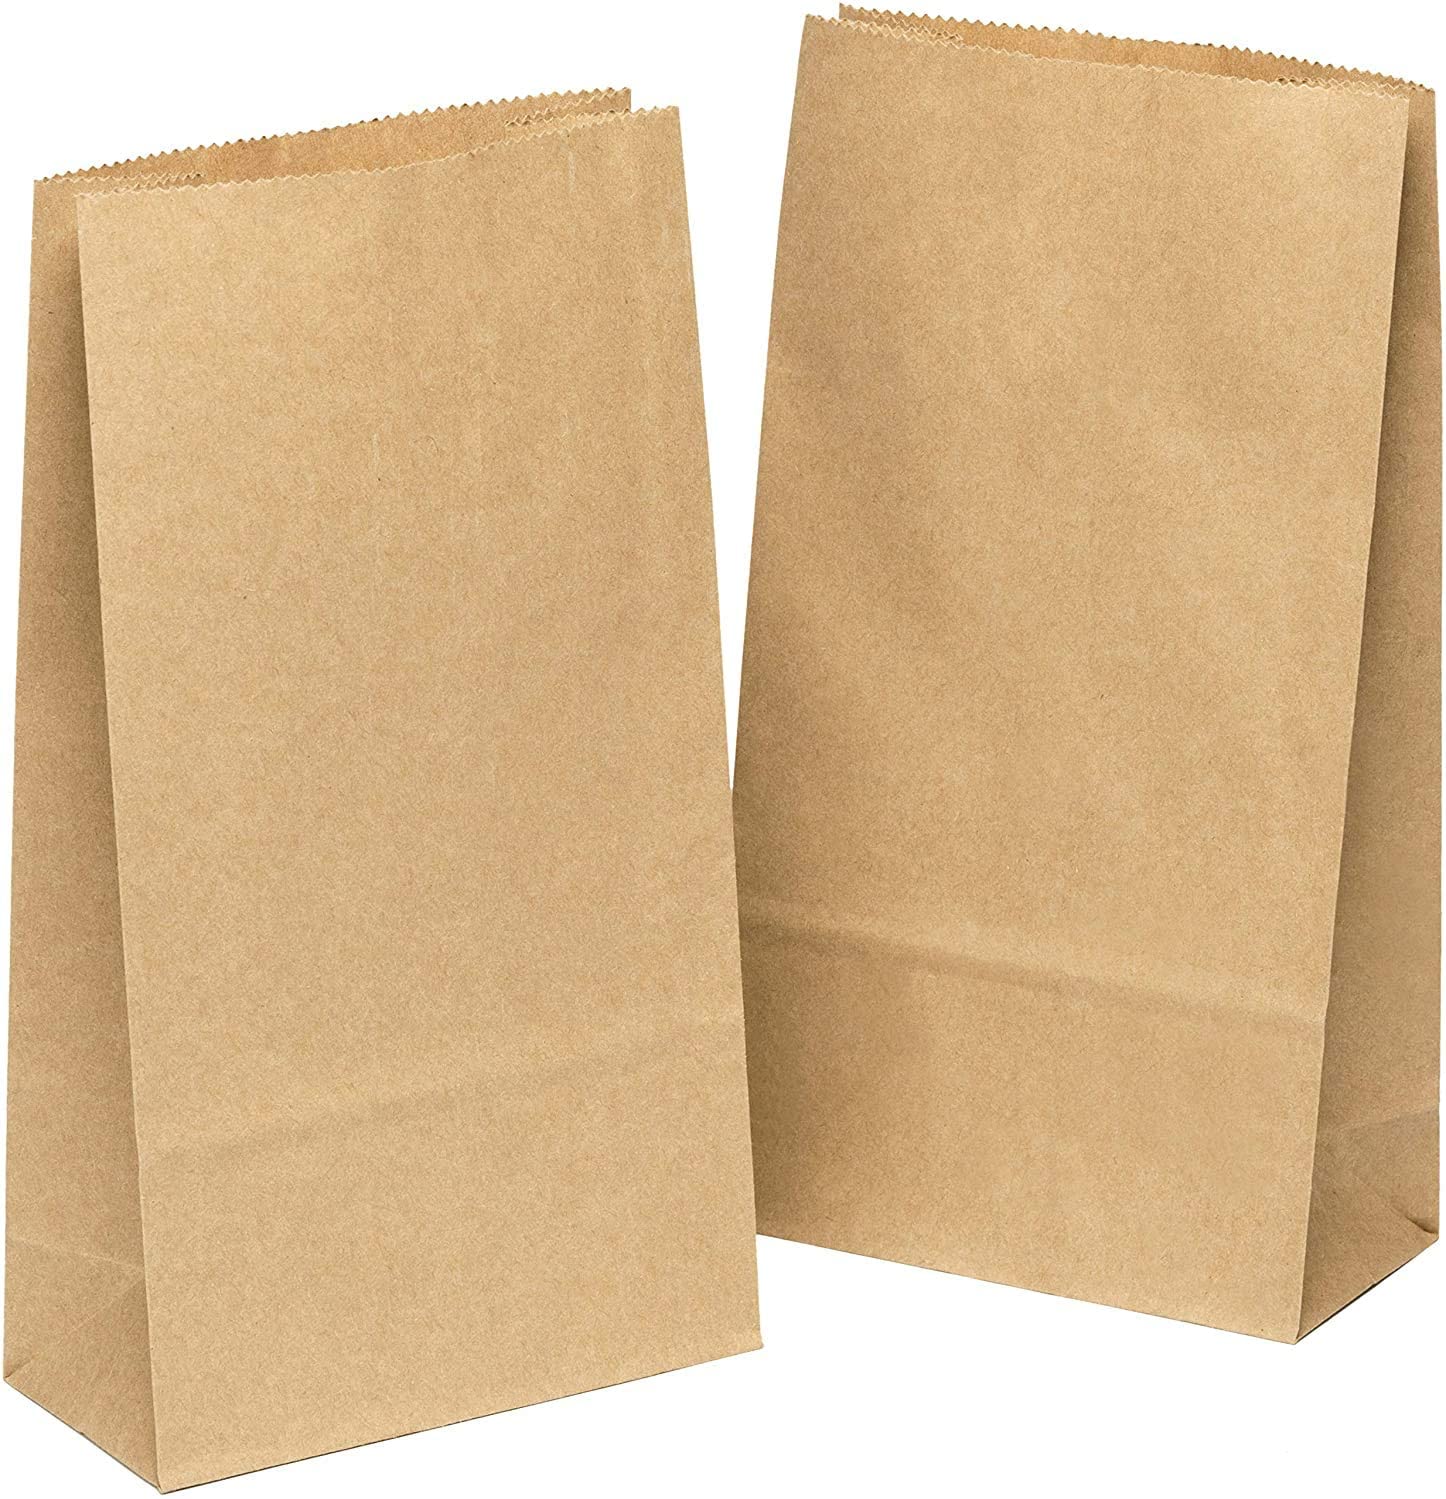 etc Party Supplier and Wedding Decoration Vordas 100 Pieces Grocery Bag Brown Paper Lunch Bags 17 x 9 x 5 cm Lunch Snack 70 g./m2 Kraft Paper Bag for Grocery 